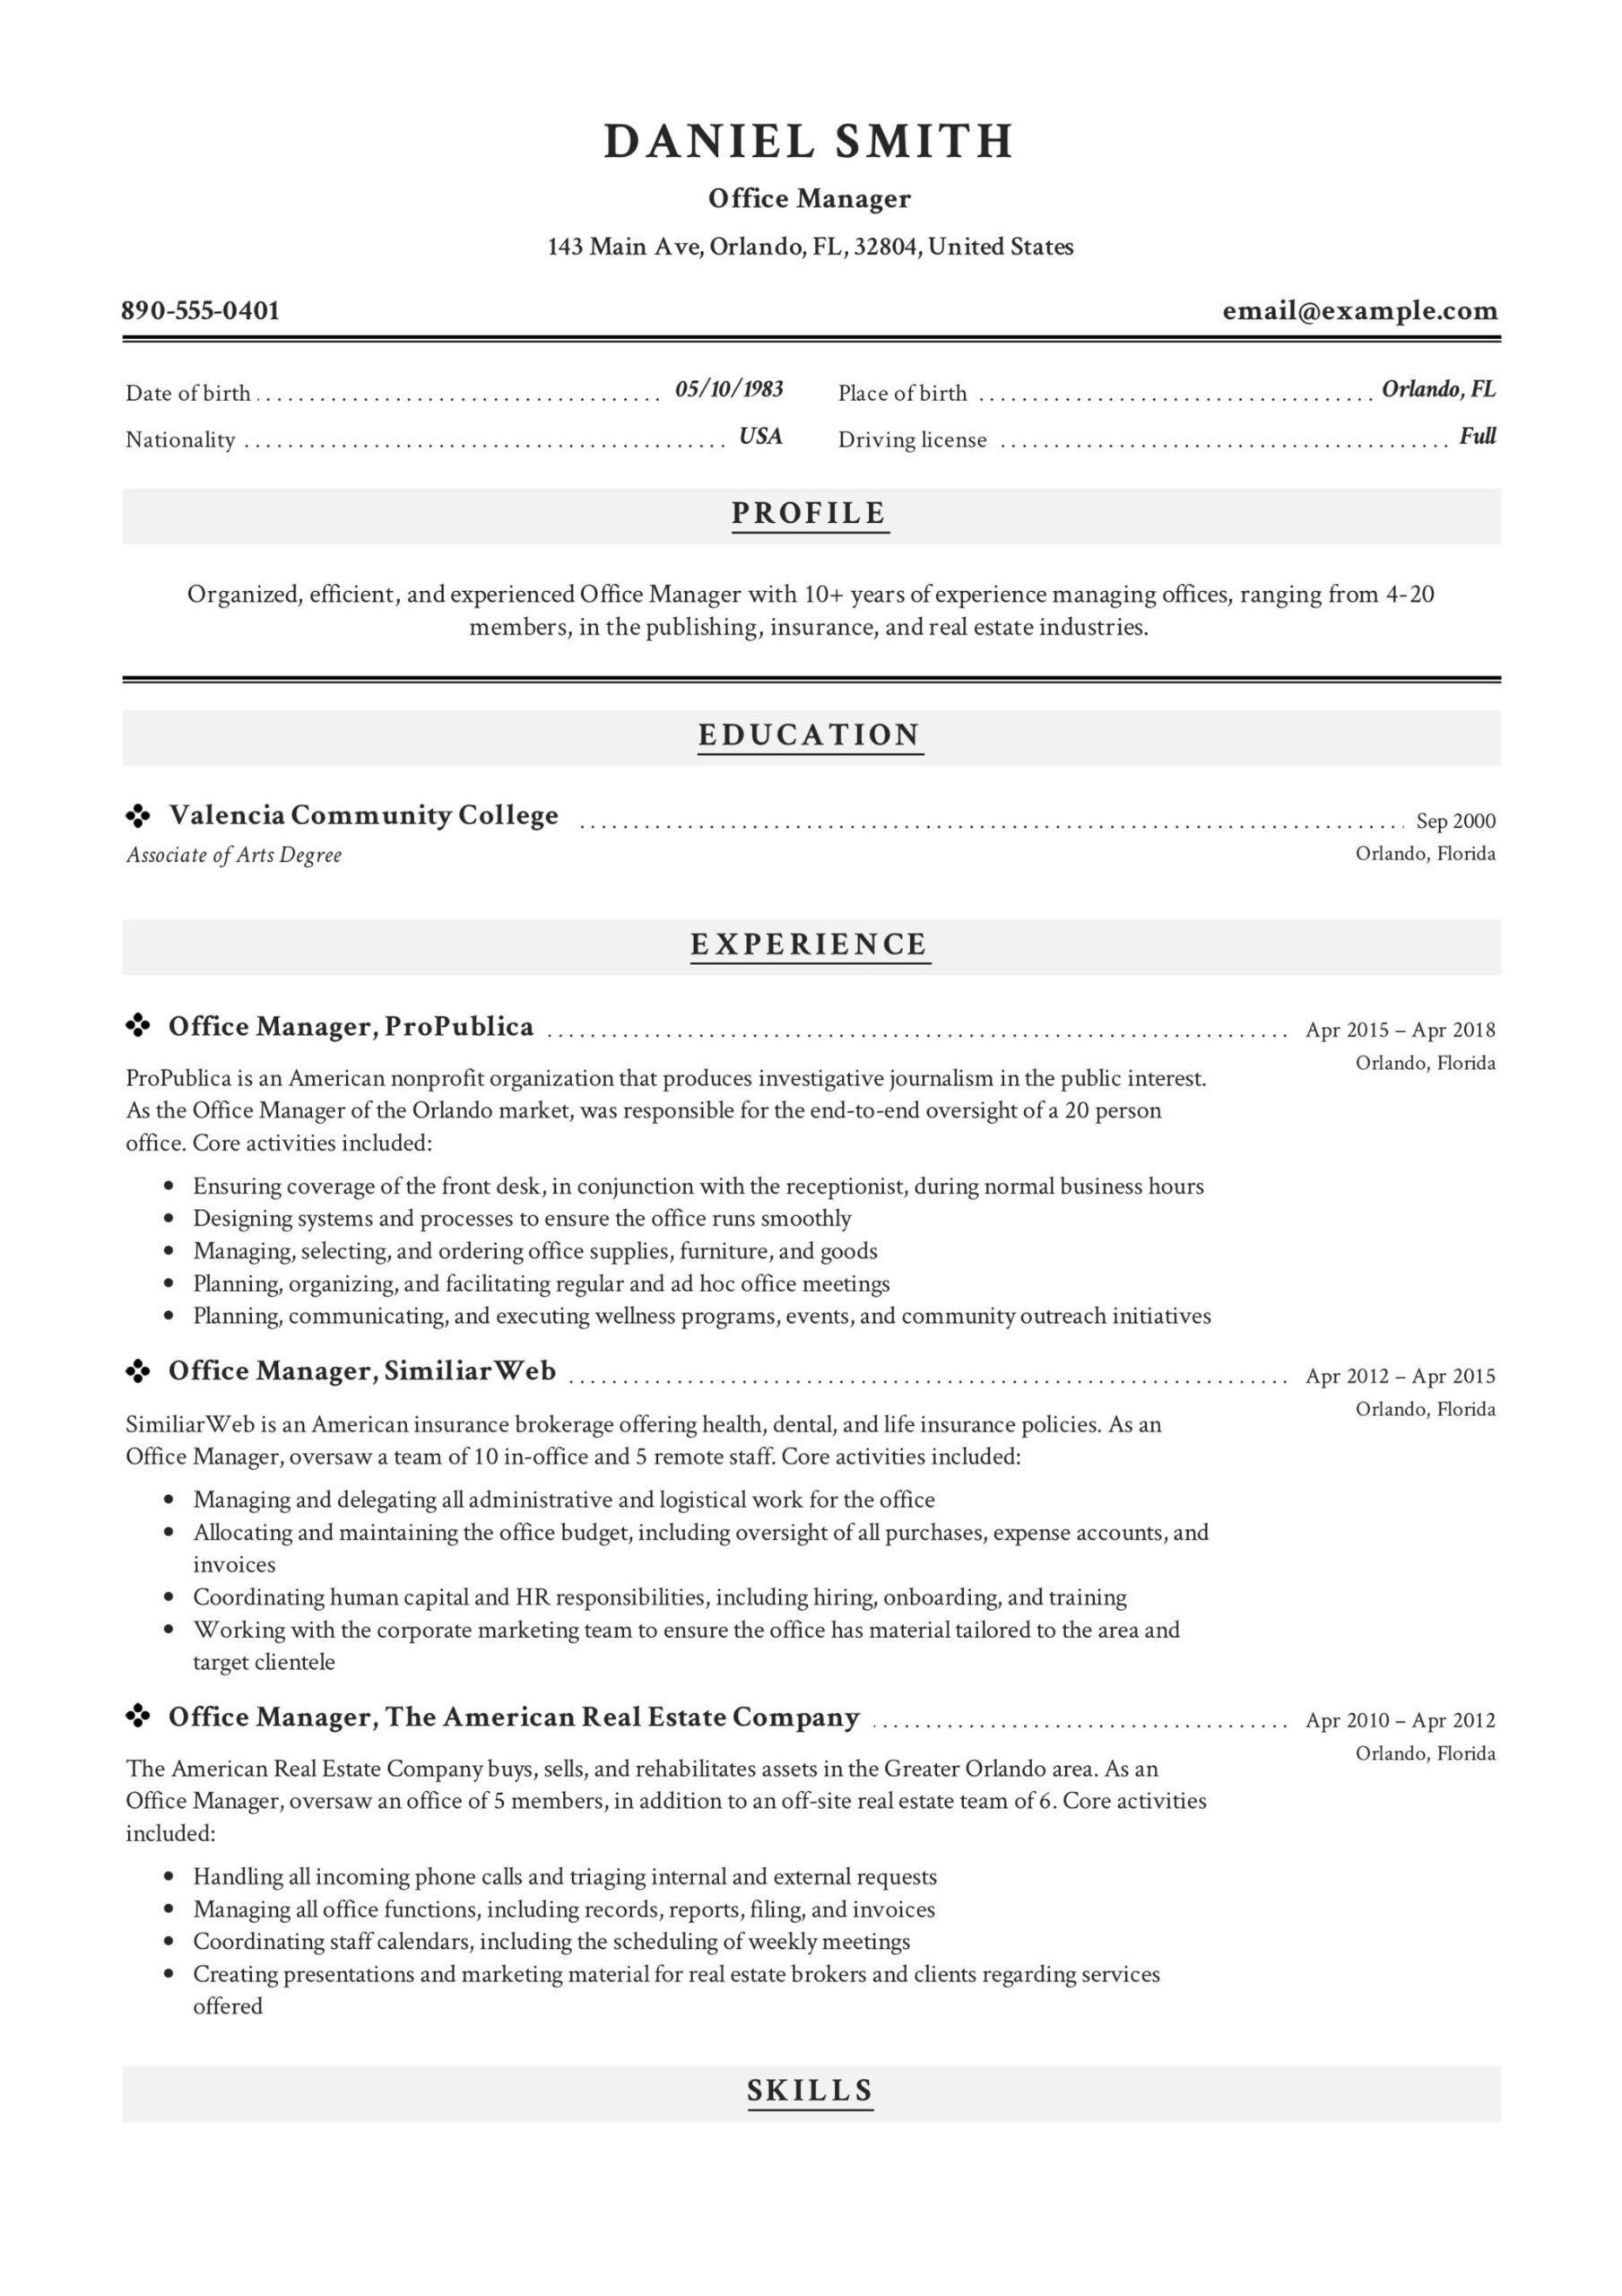 Sample Resume for School Office Manager Office Manager Resume & Guide 12 Samples Pdf 2021